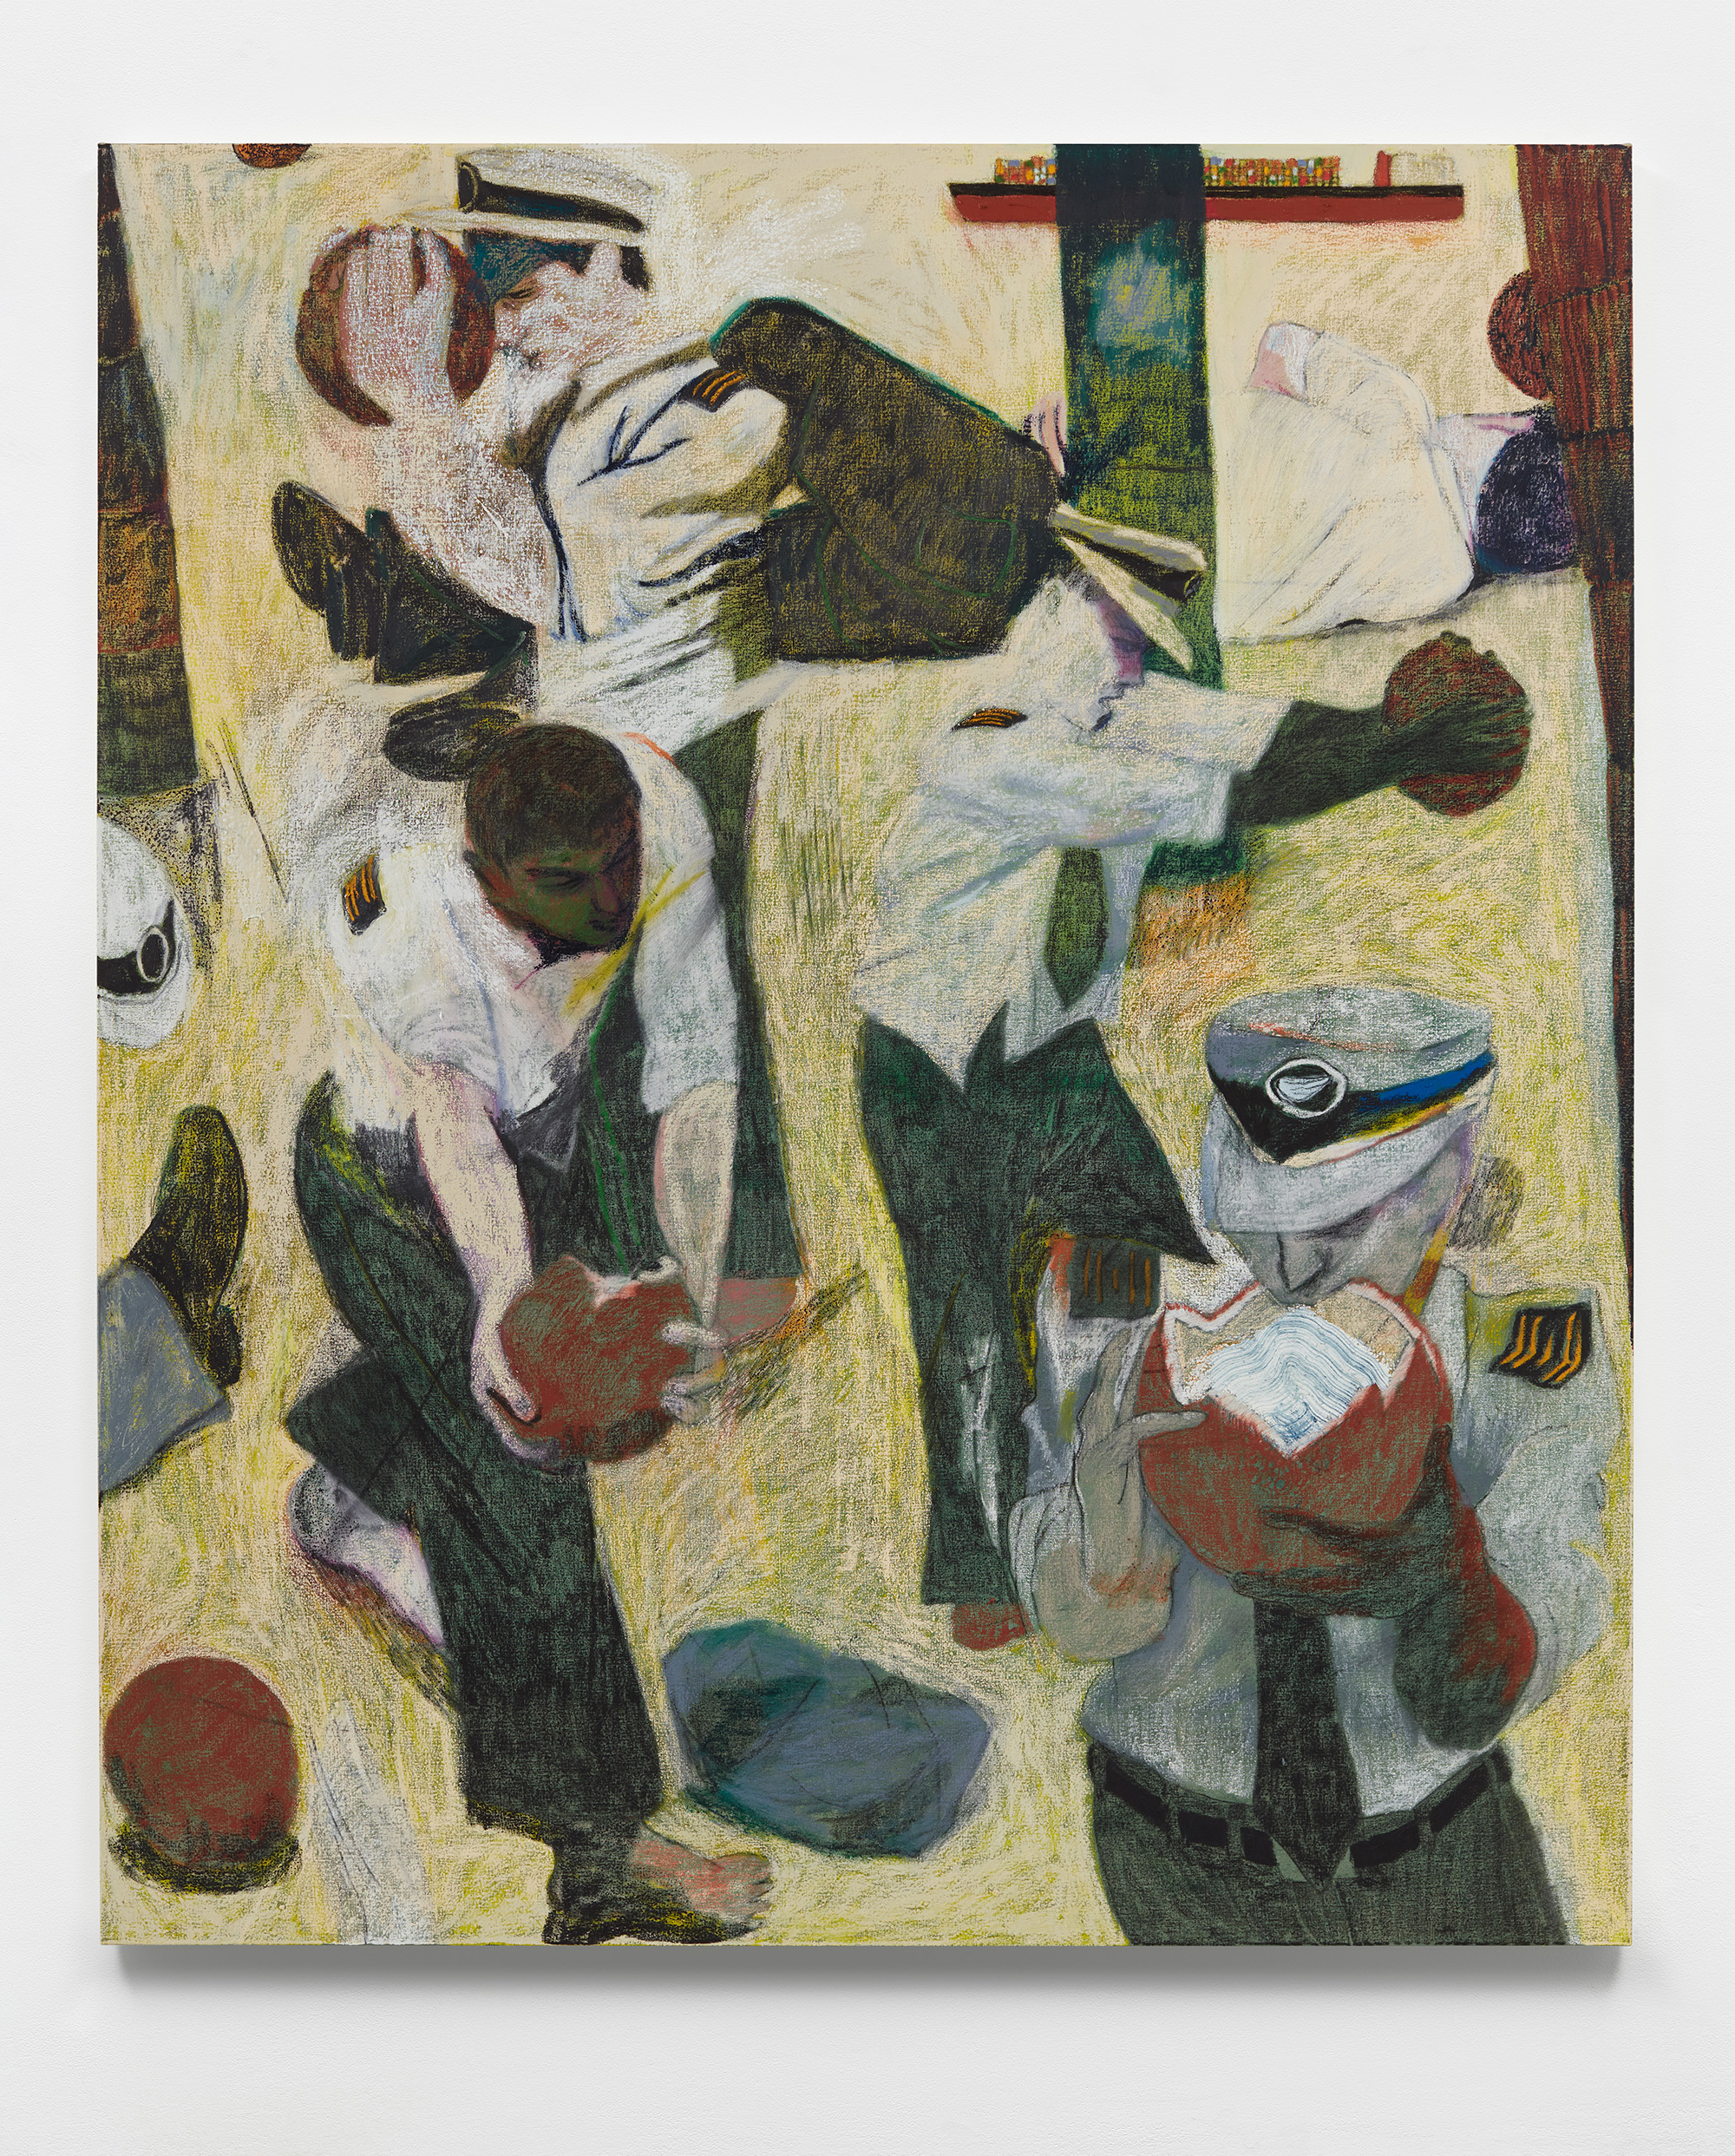 Henry Curchod, Airport bar, 2023, oil and charcoal on linen, 200 x 170 cm, 78 3/4 x 66 7/8 in.